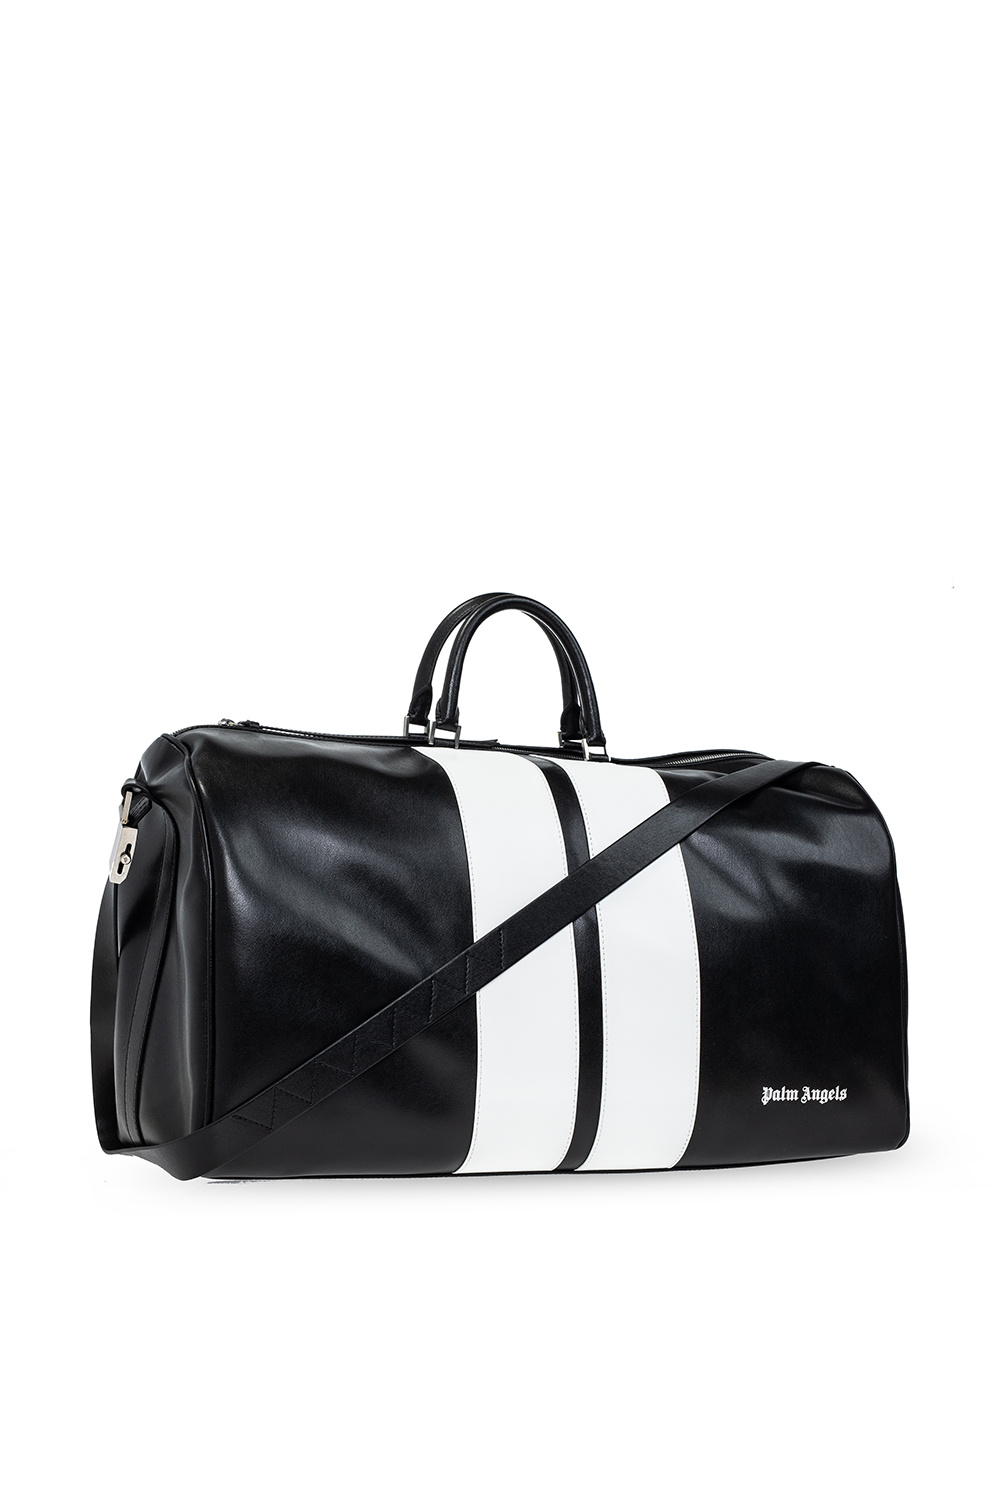 Palm Angels Leather duffel bag with logo